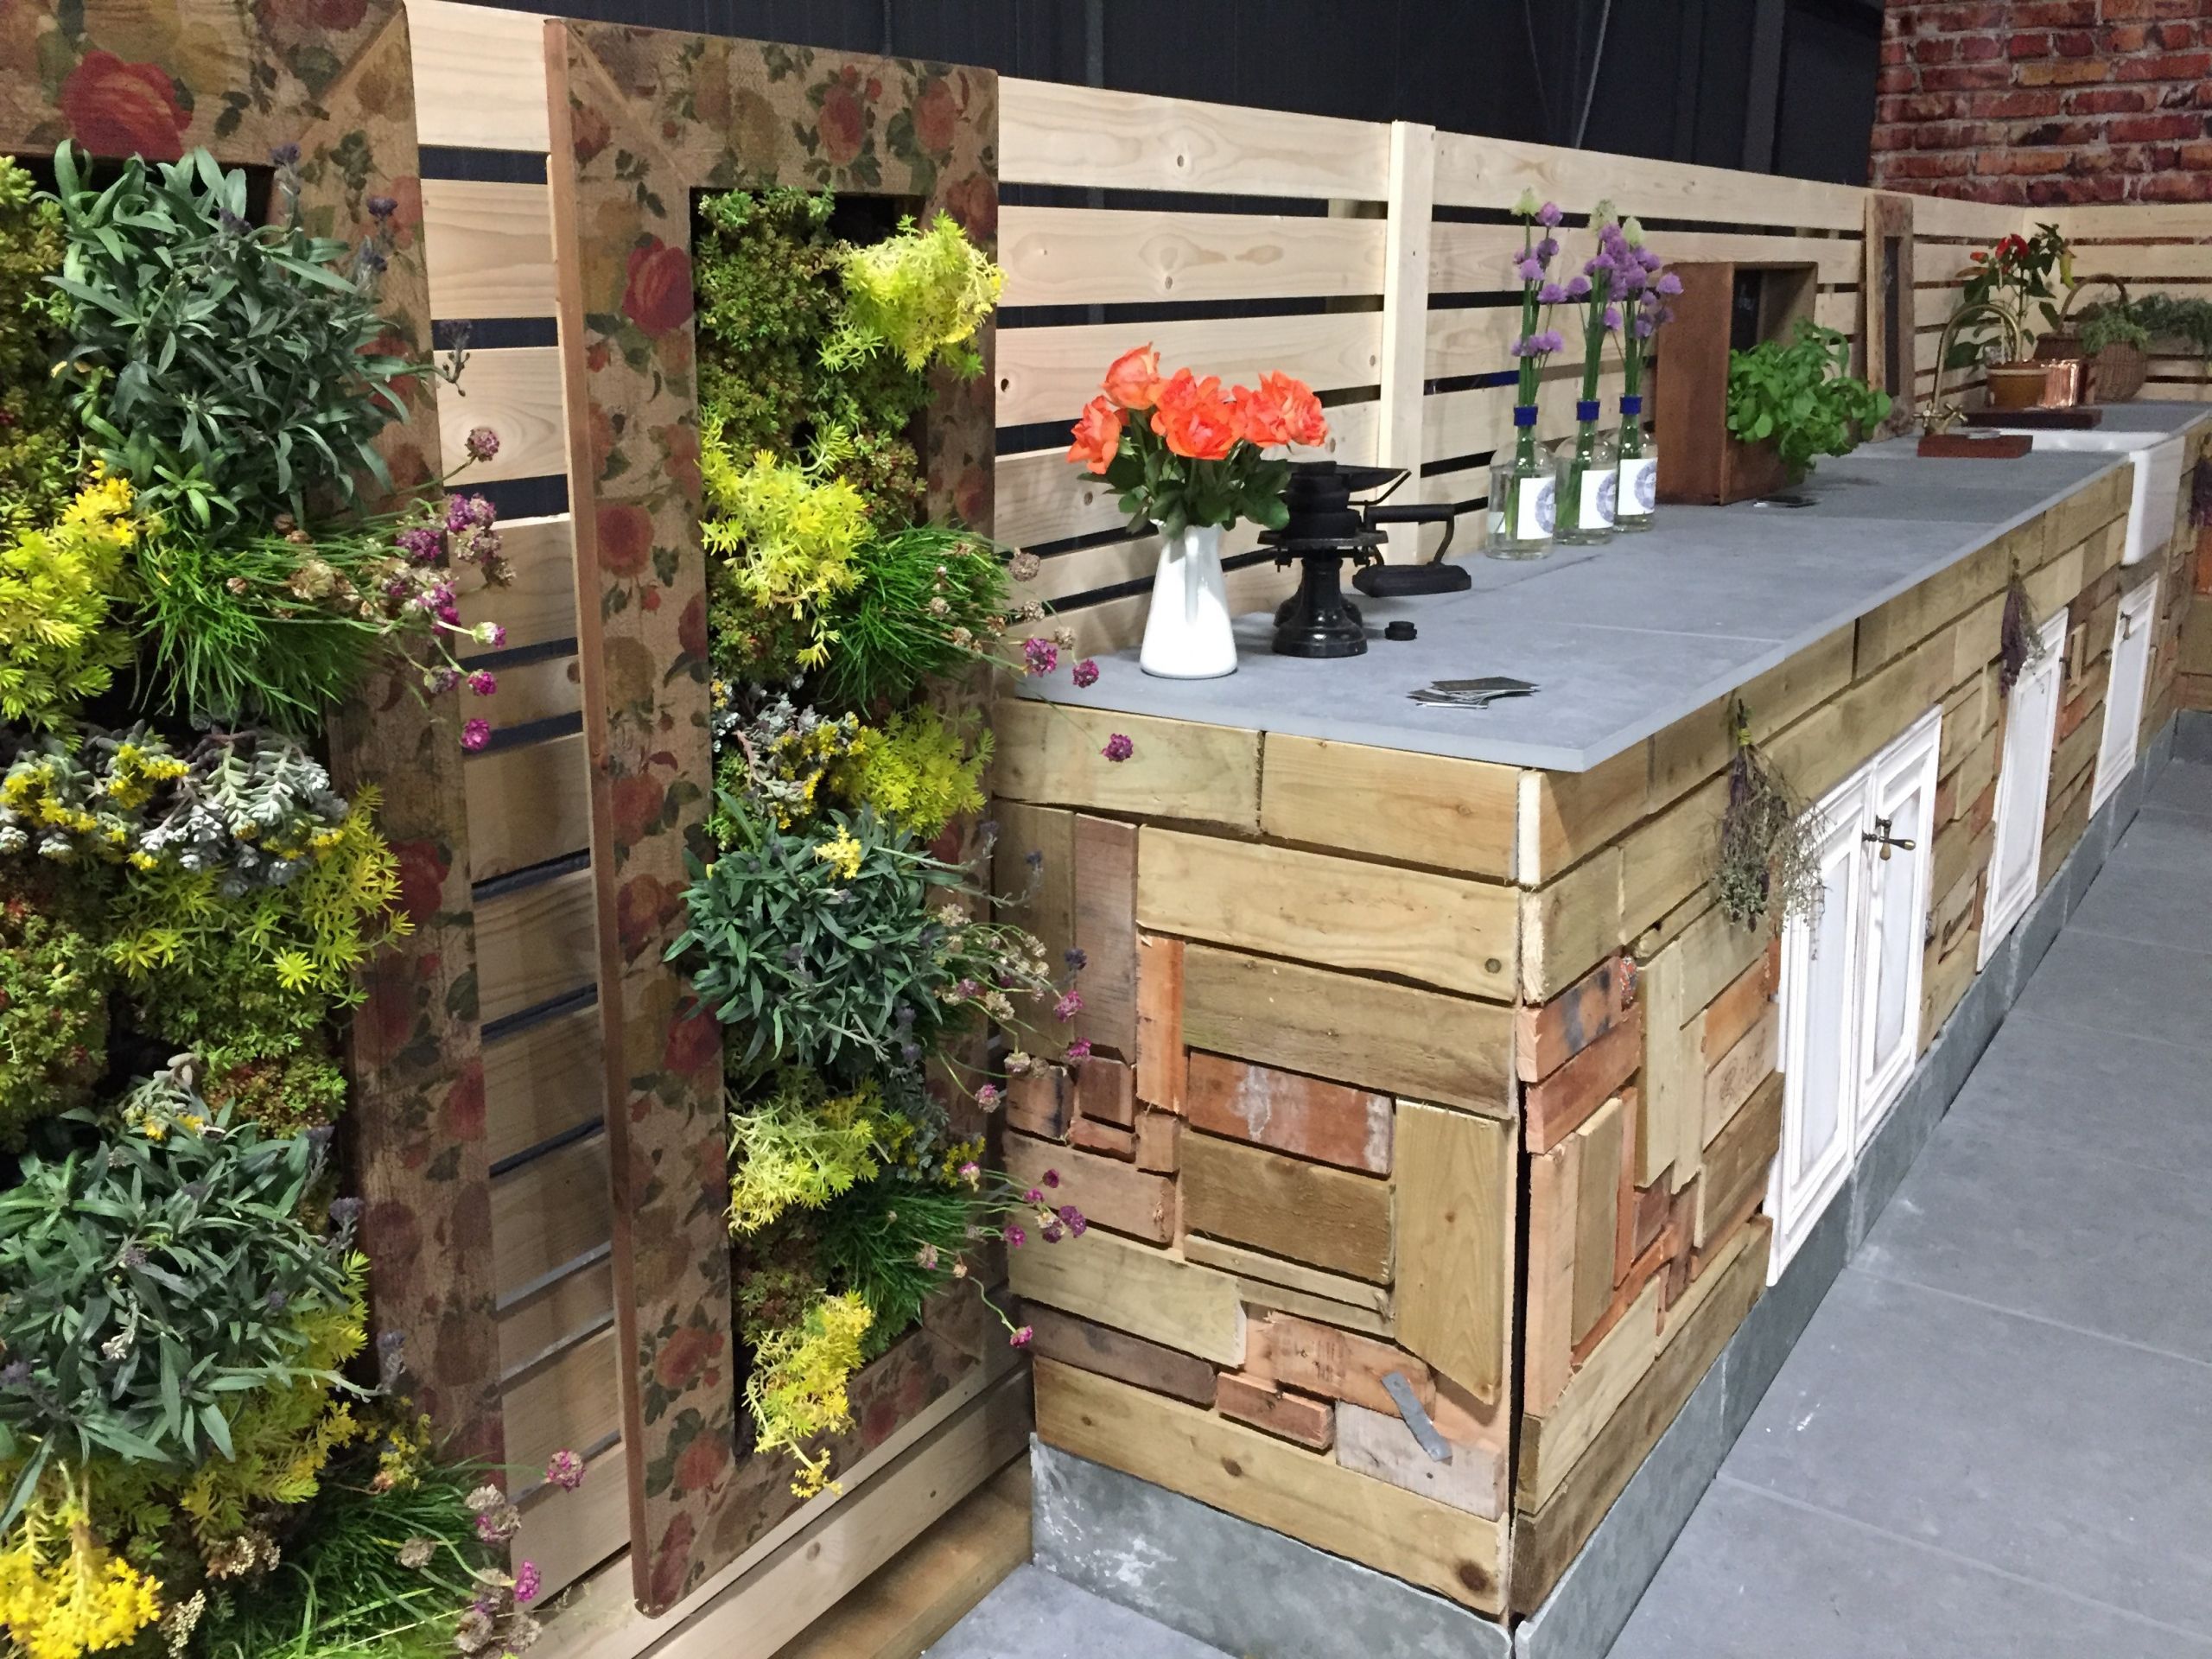 Build Your Own Outdoor Kitchens
 Get Creative Build Your Own Quirky OUTDOOR kitchen